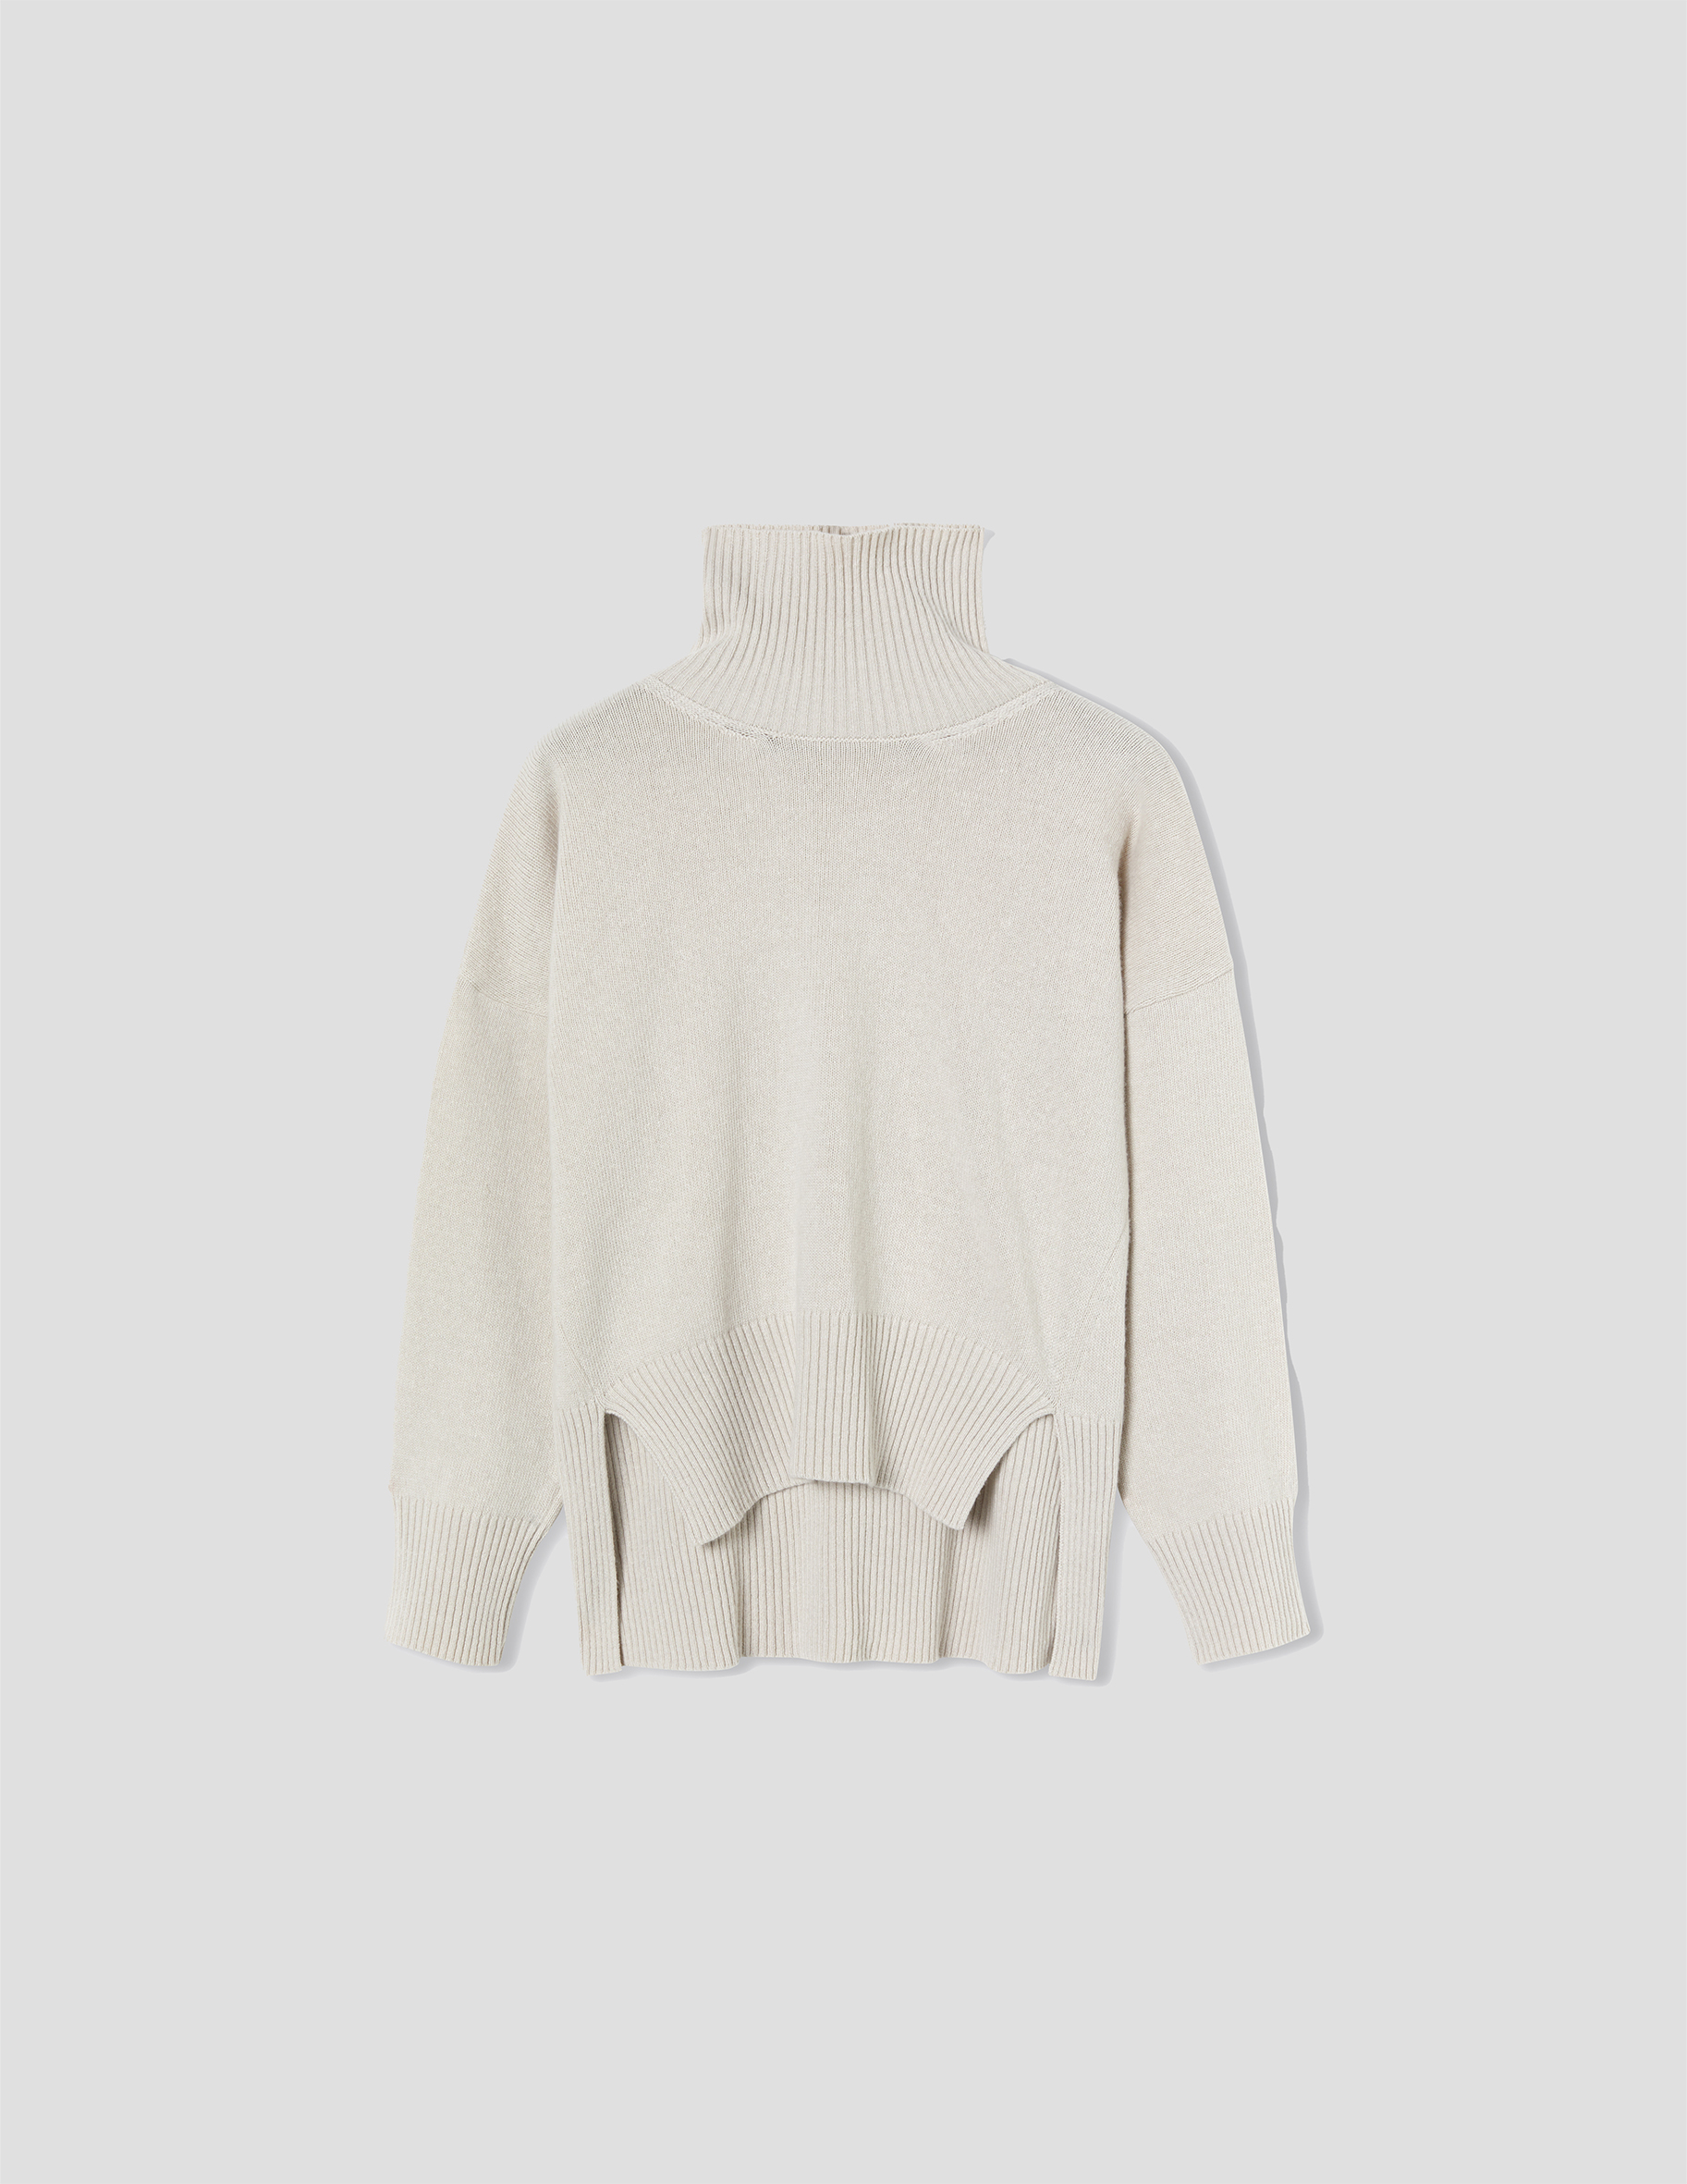 Oversized Cashmere-Knit Sweater product